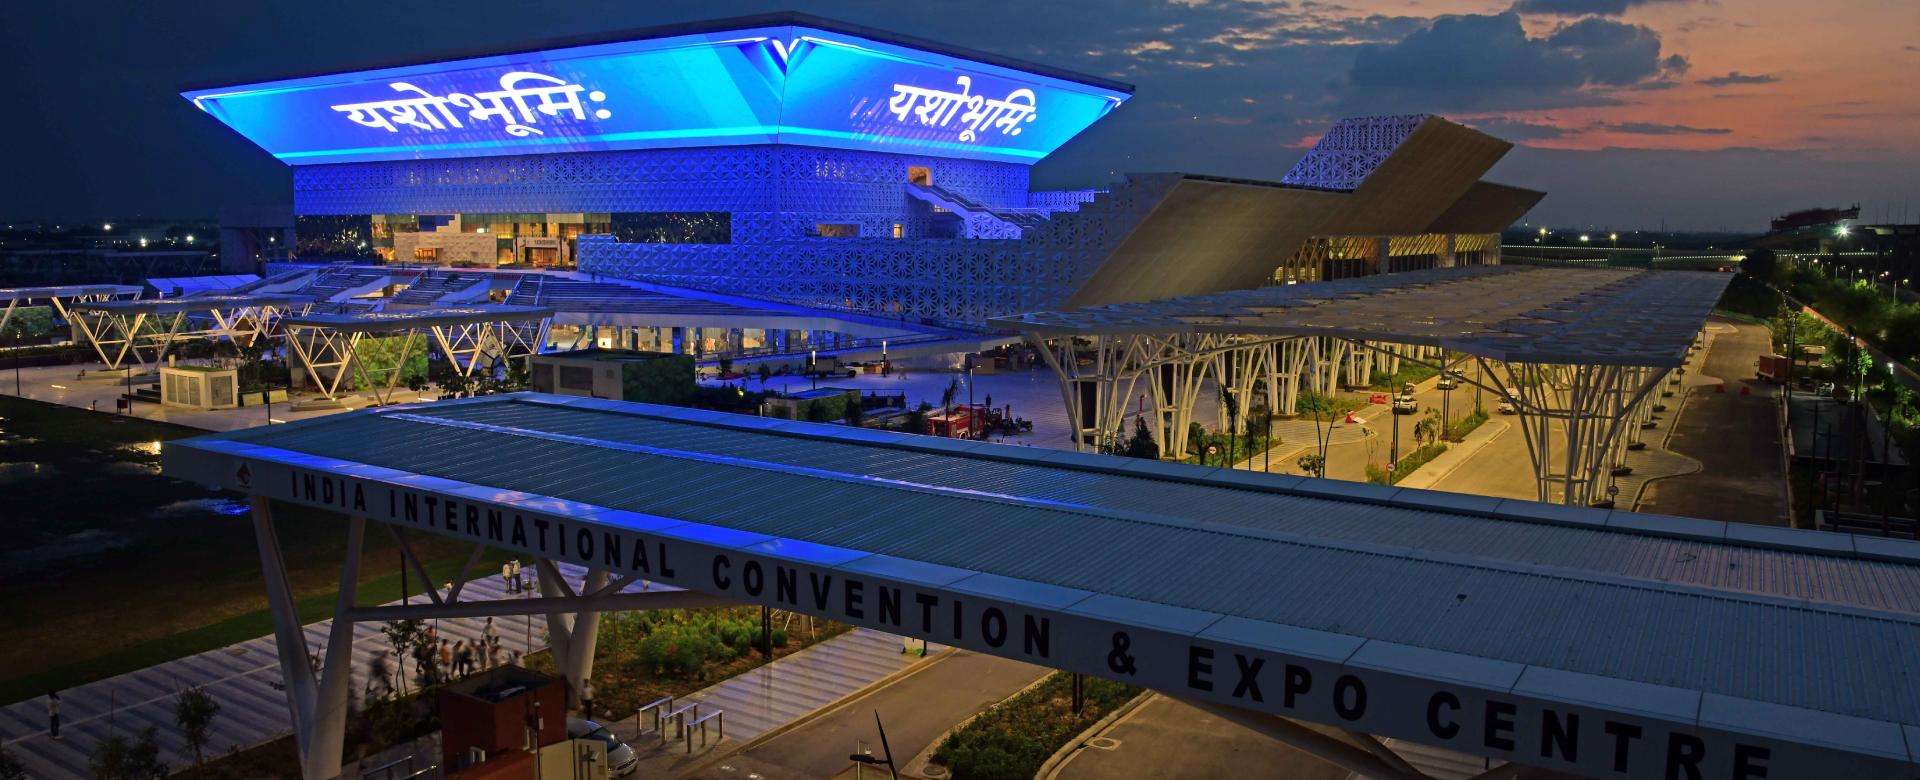 ‘Yashobhoomi’ - Phase 1 of India International Convention and Expo Centre, New Delhi